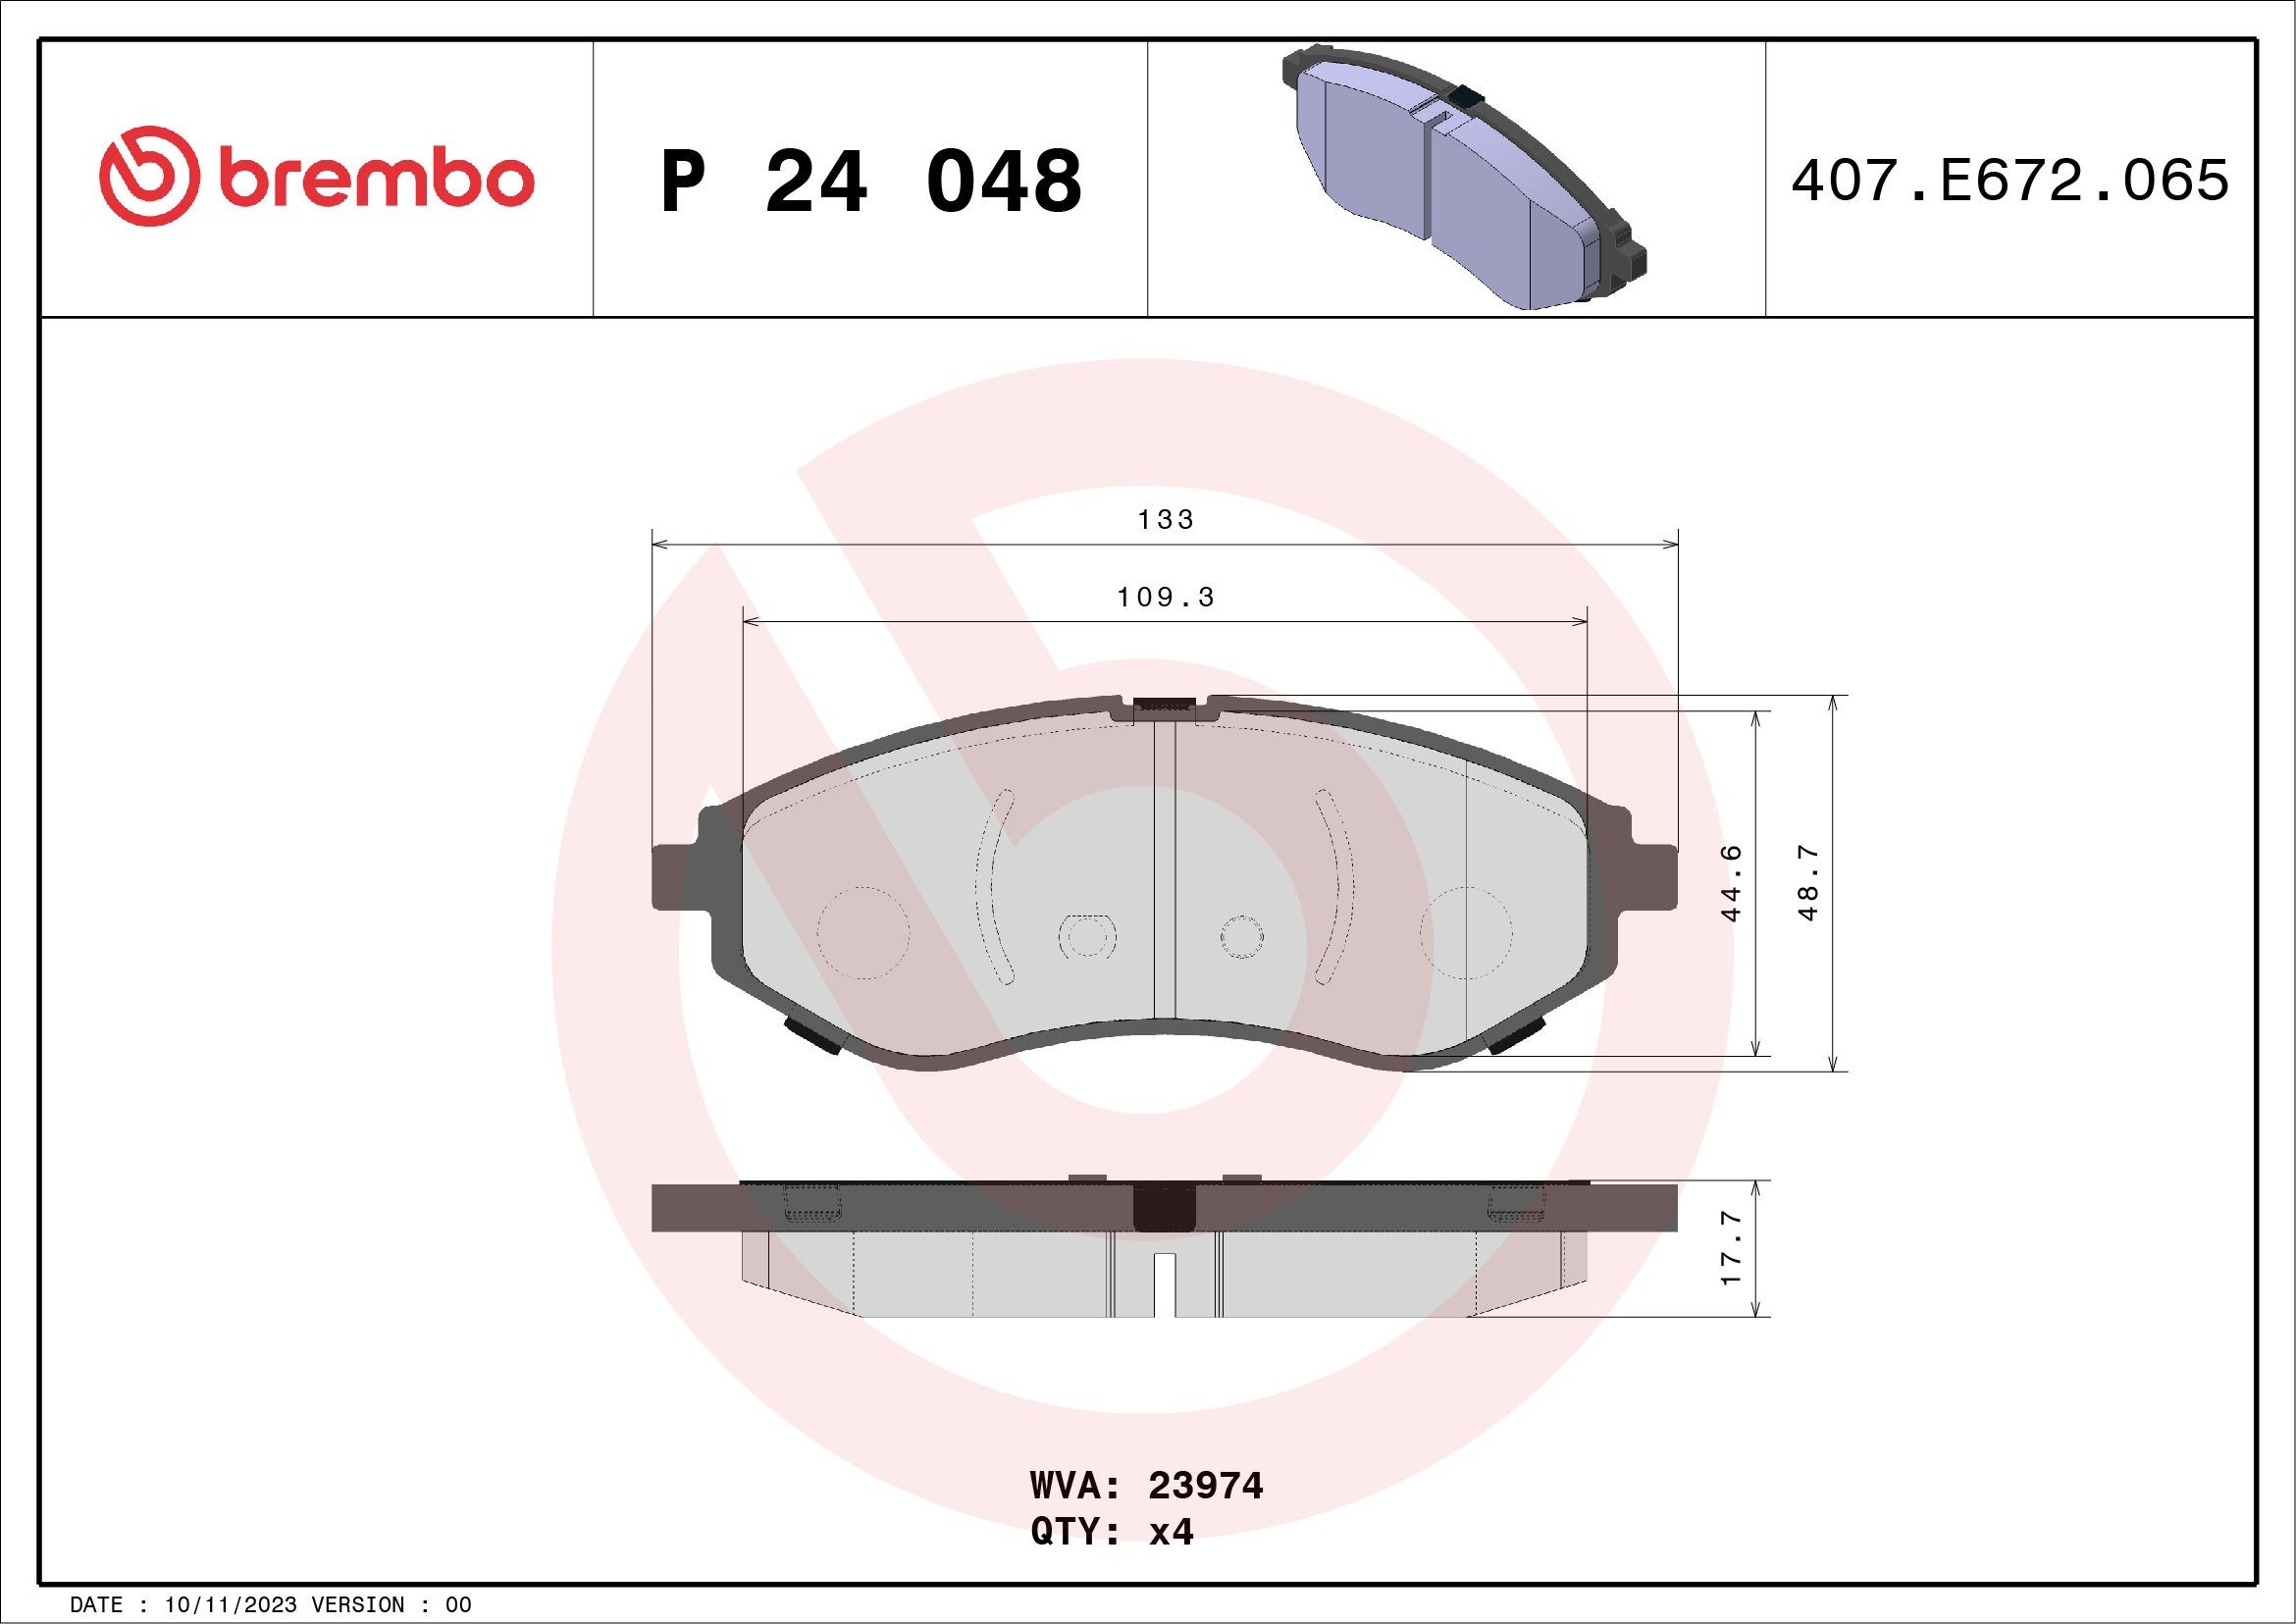 BREMBO P 24 048 Brake pad set excl. wear warning contact, without accessories